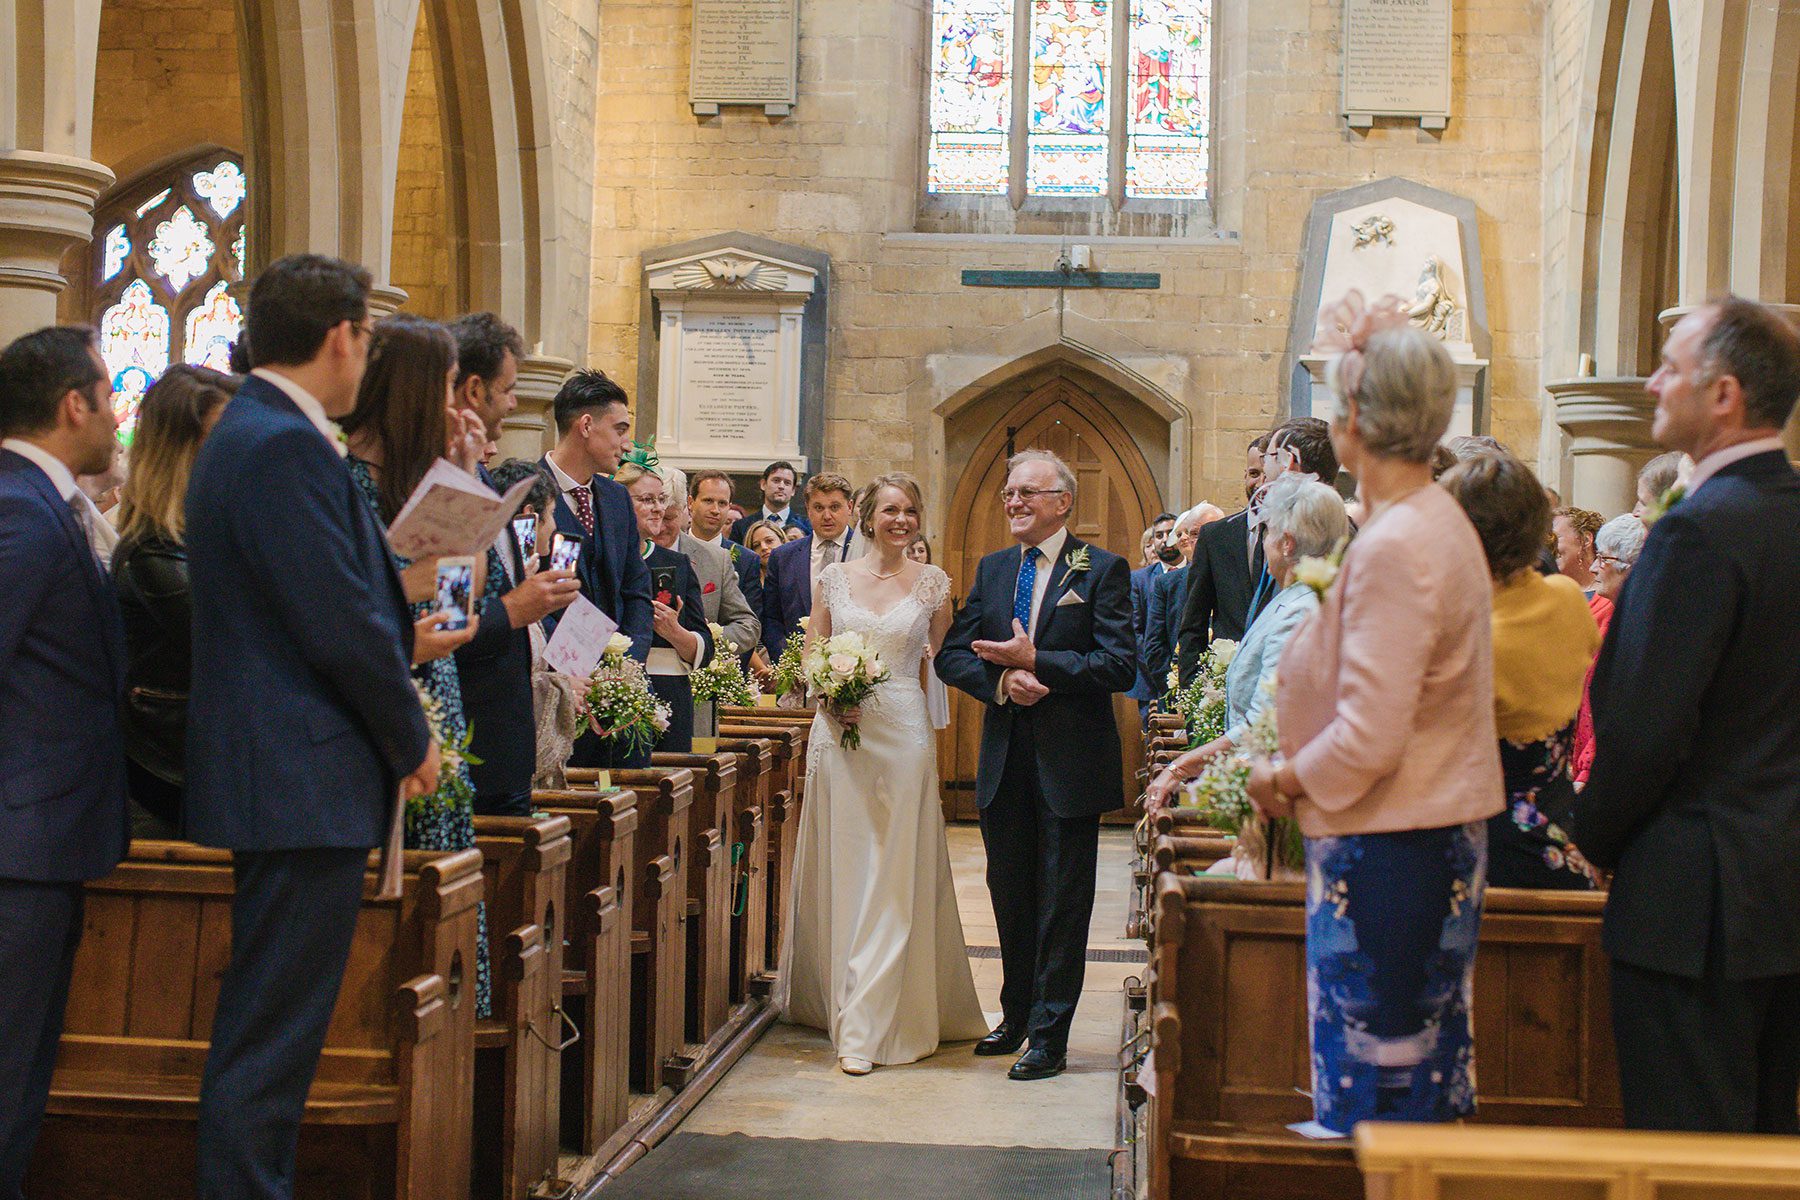 Walking down the aisle - Reportage Wedding Photography in Cheltenham, Gloucestershire & the Cotswolds | Bullit Photography.